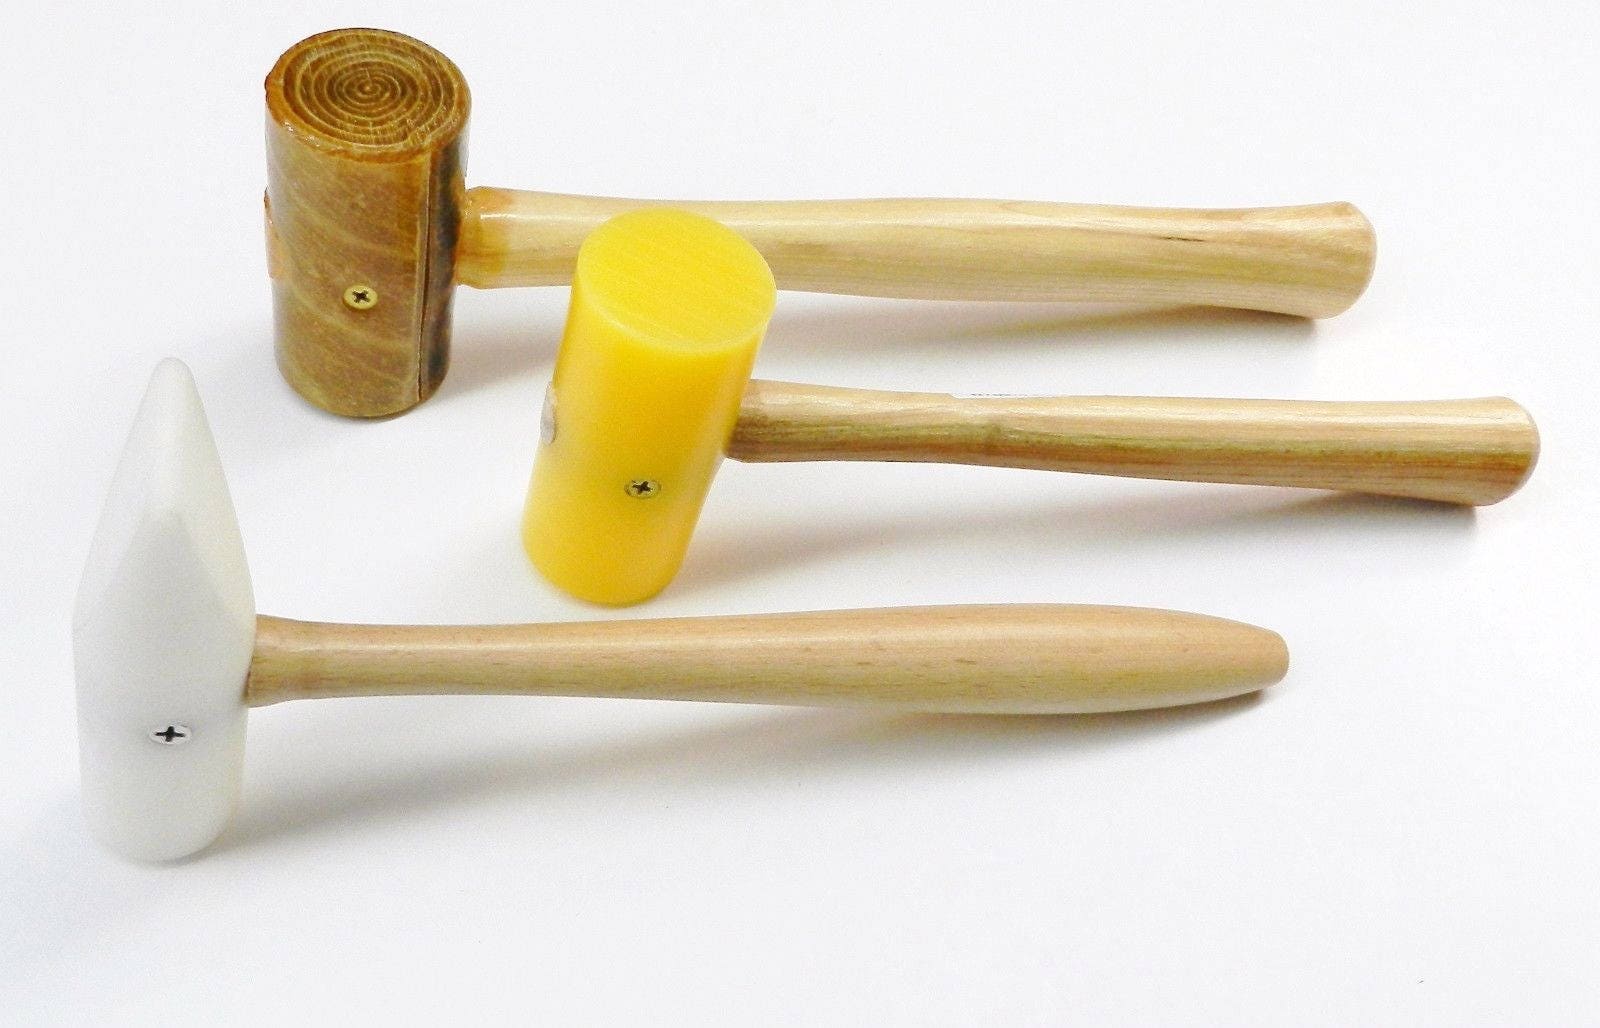 3 Mallets Rawhide Mallet Rubber & Plastic Mallet Jewelry Leather Crafts Set of 3